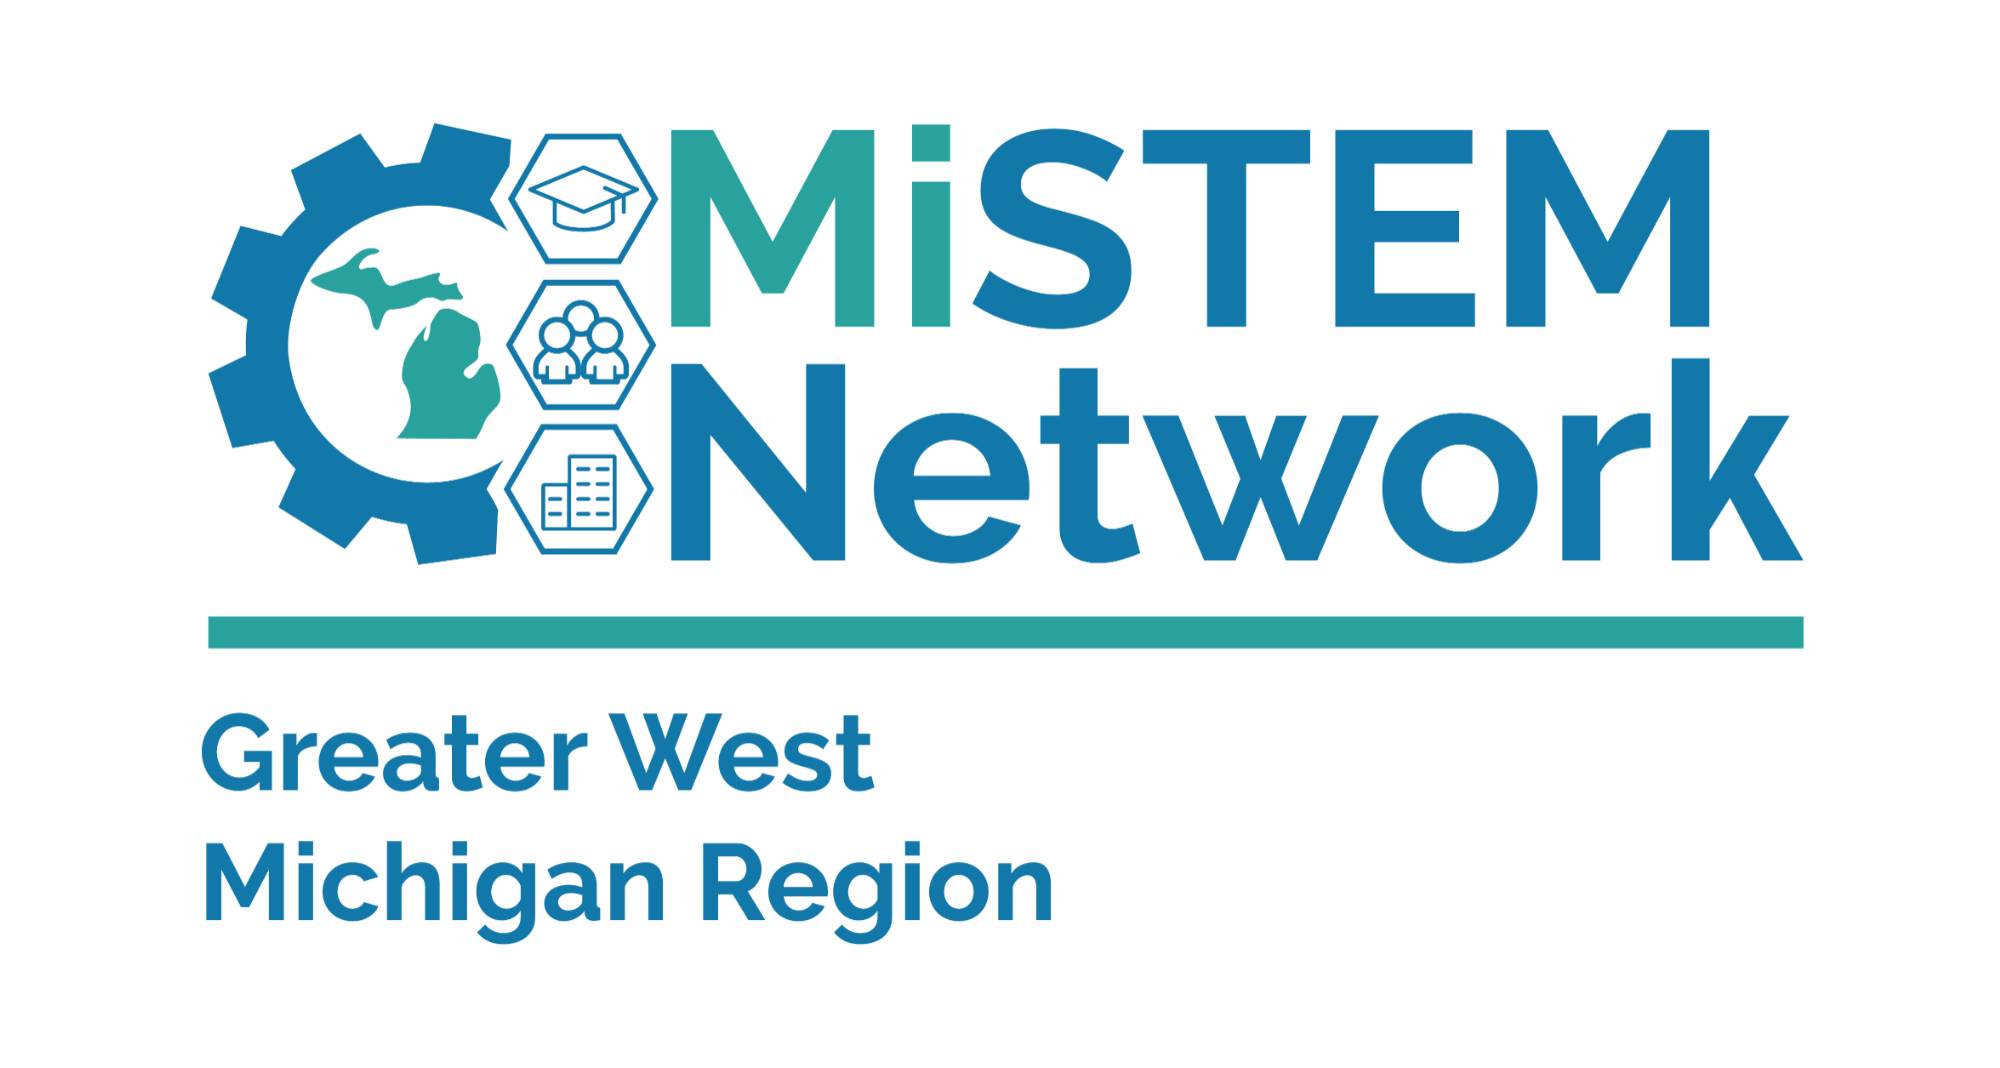 Greater West Michigan Region of the MiSTEM Network